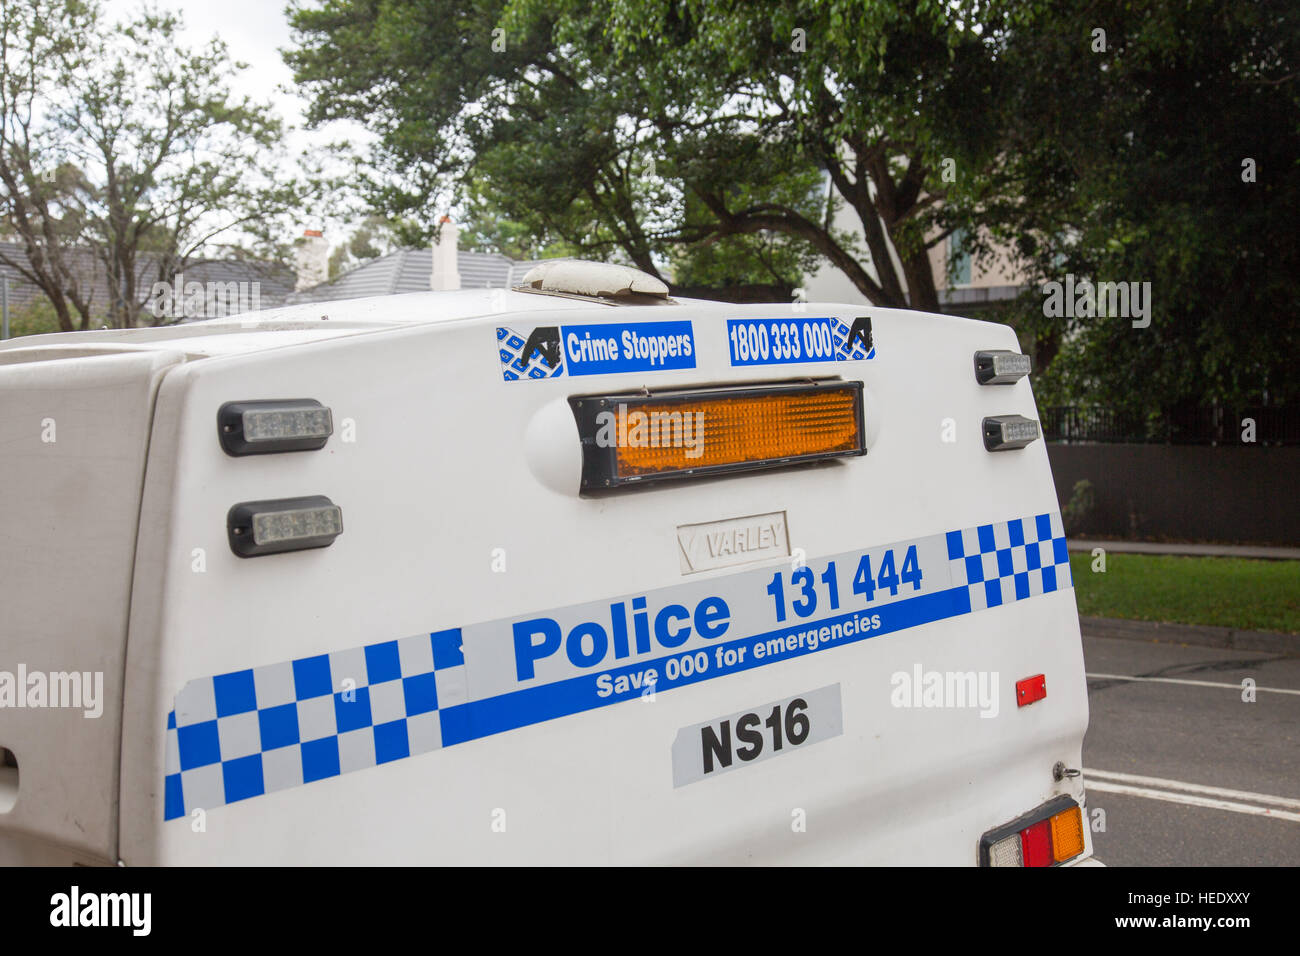 New South Wales police vehicle transport in Sydney,NSW, Australia Stock Photo